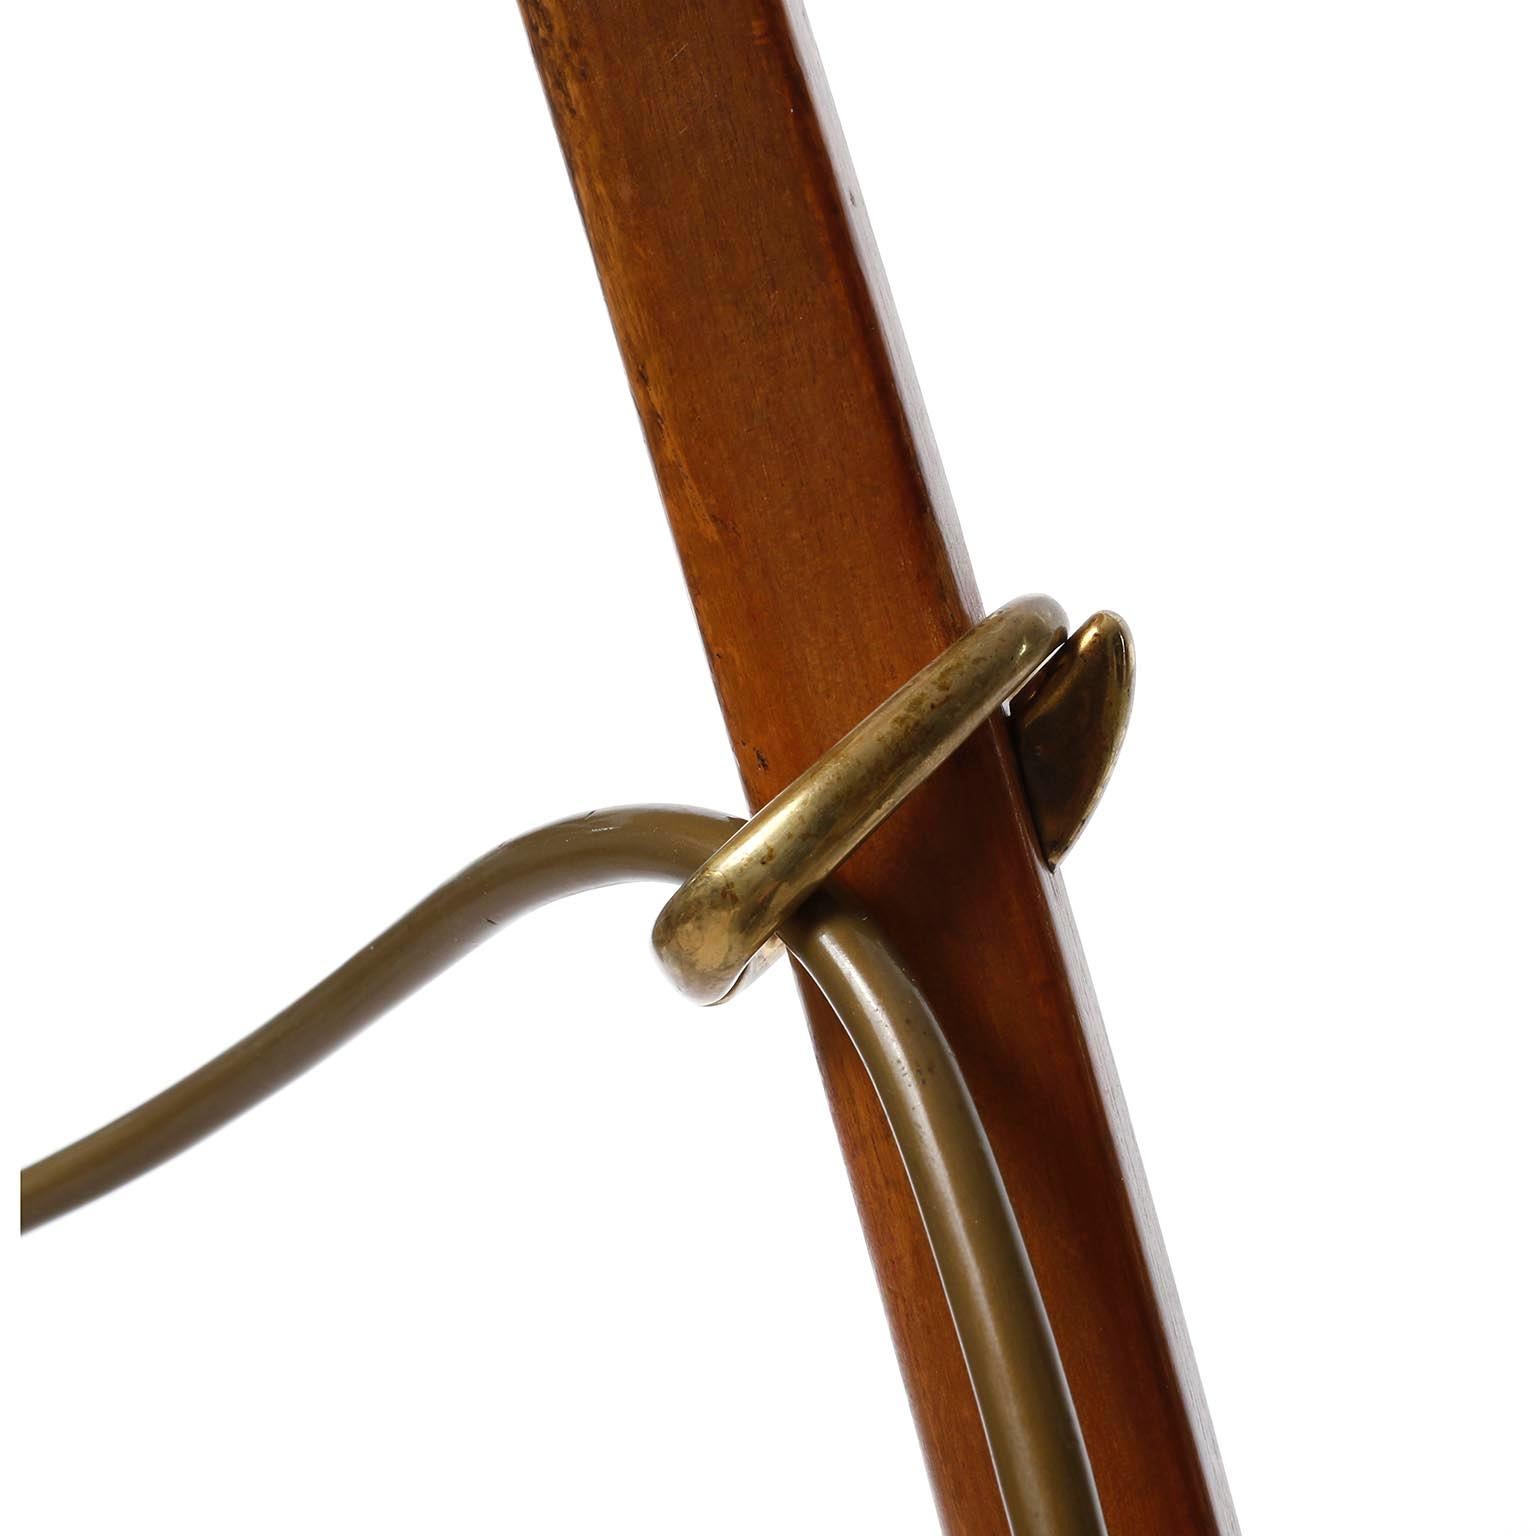 Floor Lamp 'Dornstab' No. 2076 by J.T. Kalmar, Patinated Brass Wood Cane, 1960 For Sale 5